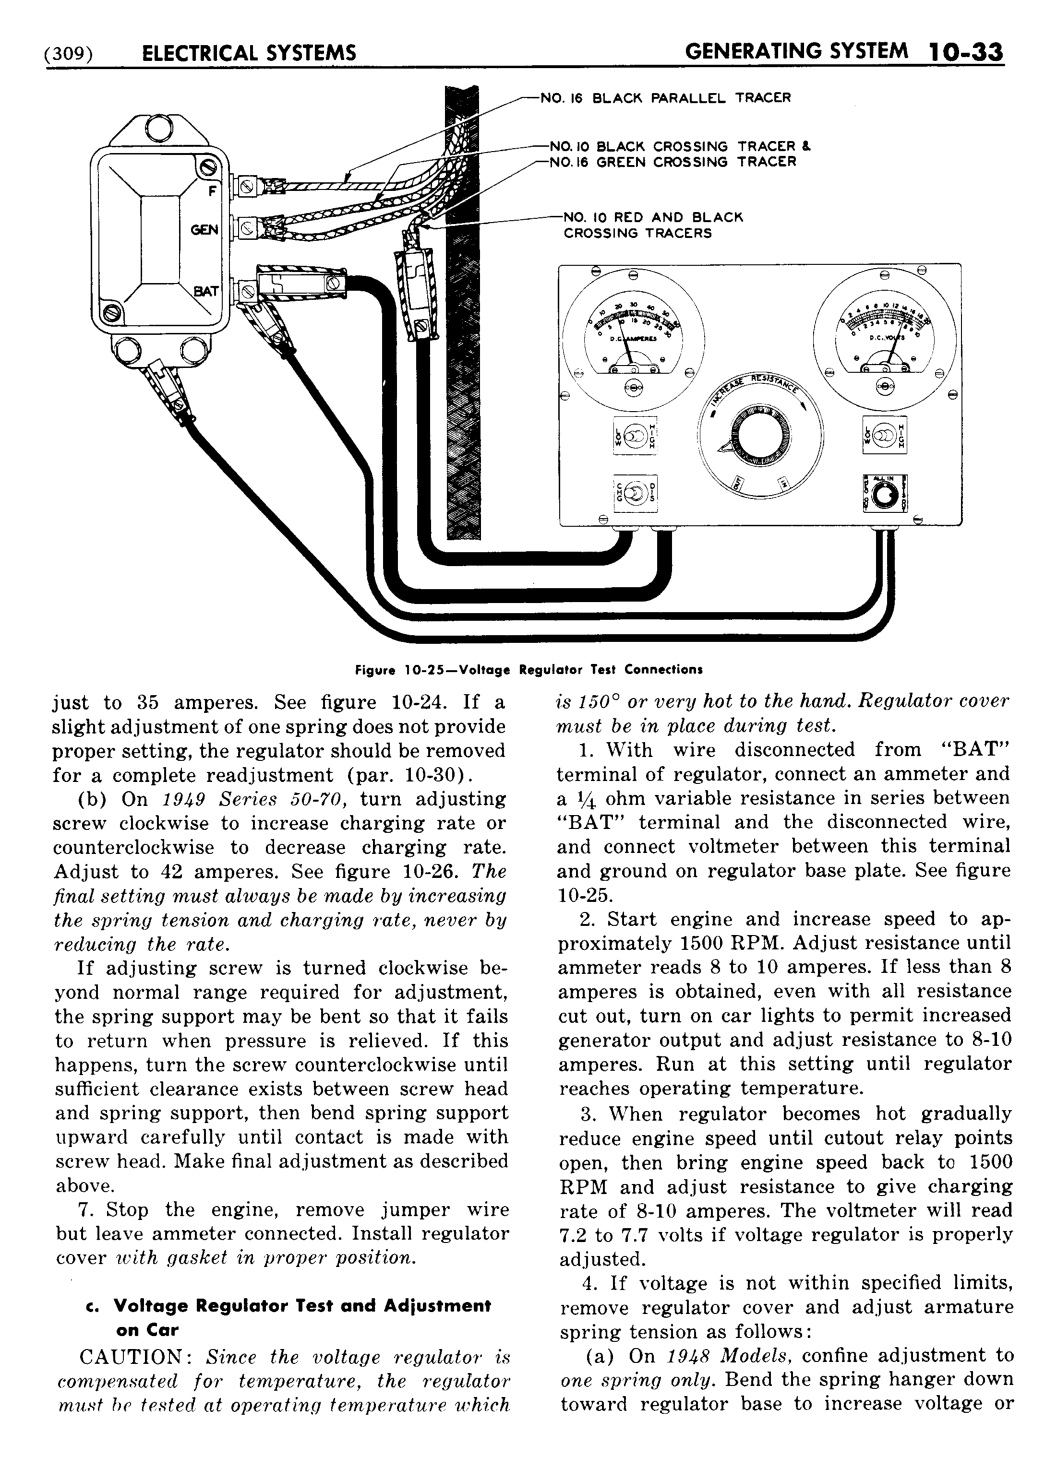 n_11 1948 Buick Shop Manual - Electrical Systems-033-033.jpg